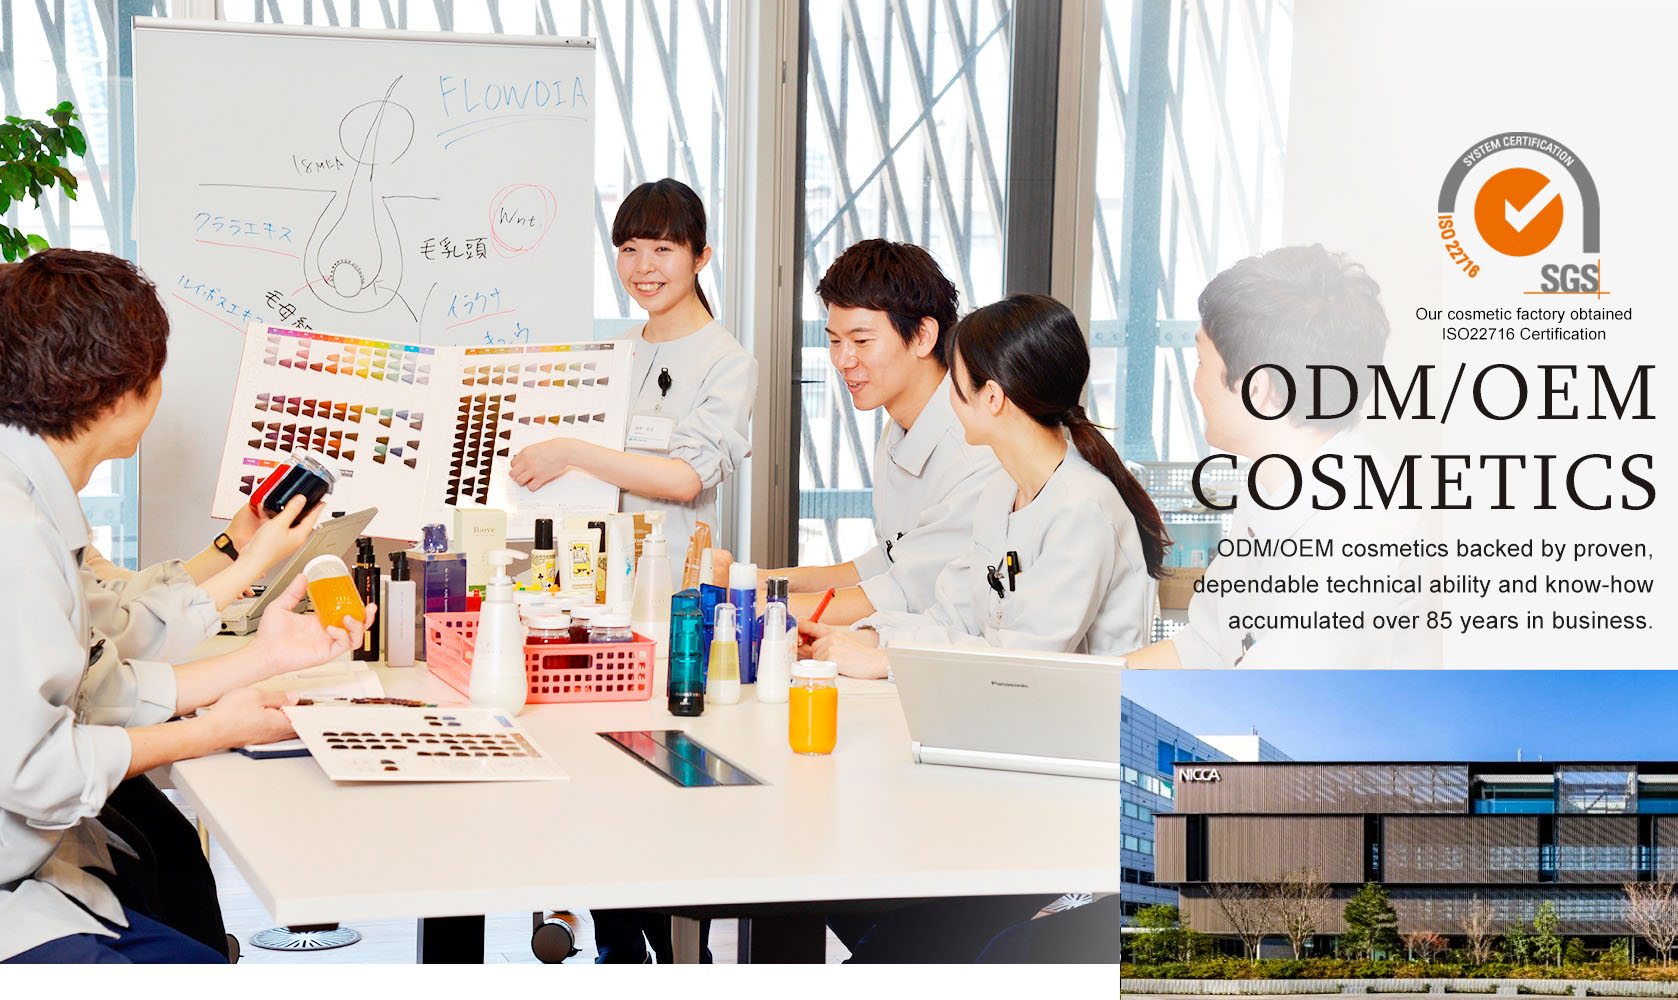 ODM/OEM cosmetics backed by proven, dependable technical ability and know-how
accumulated over 85 years in business.